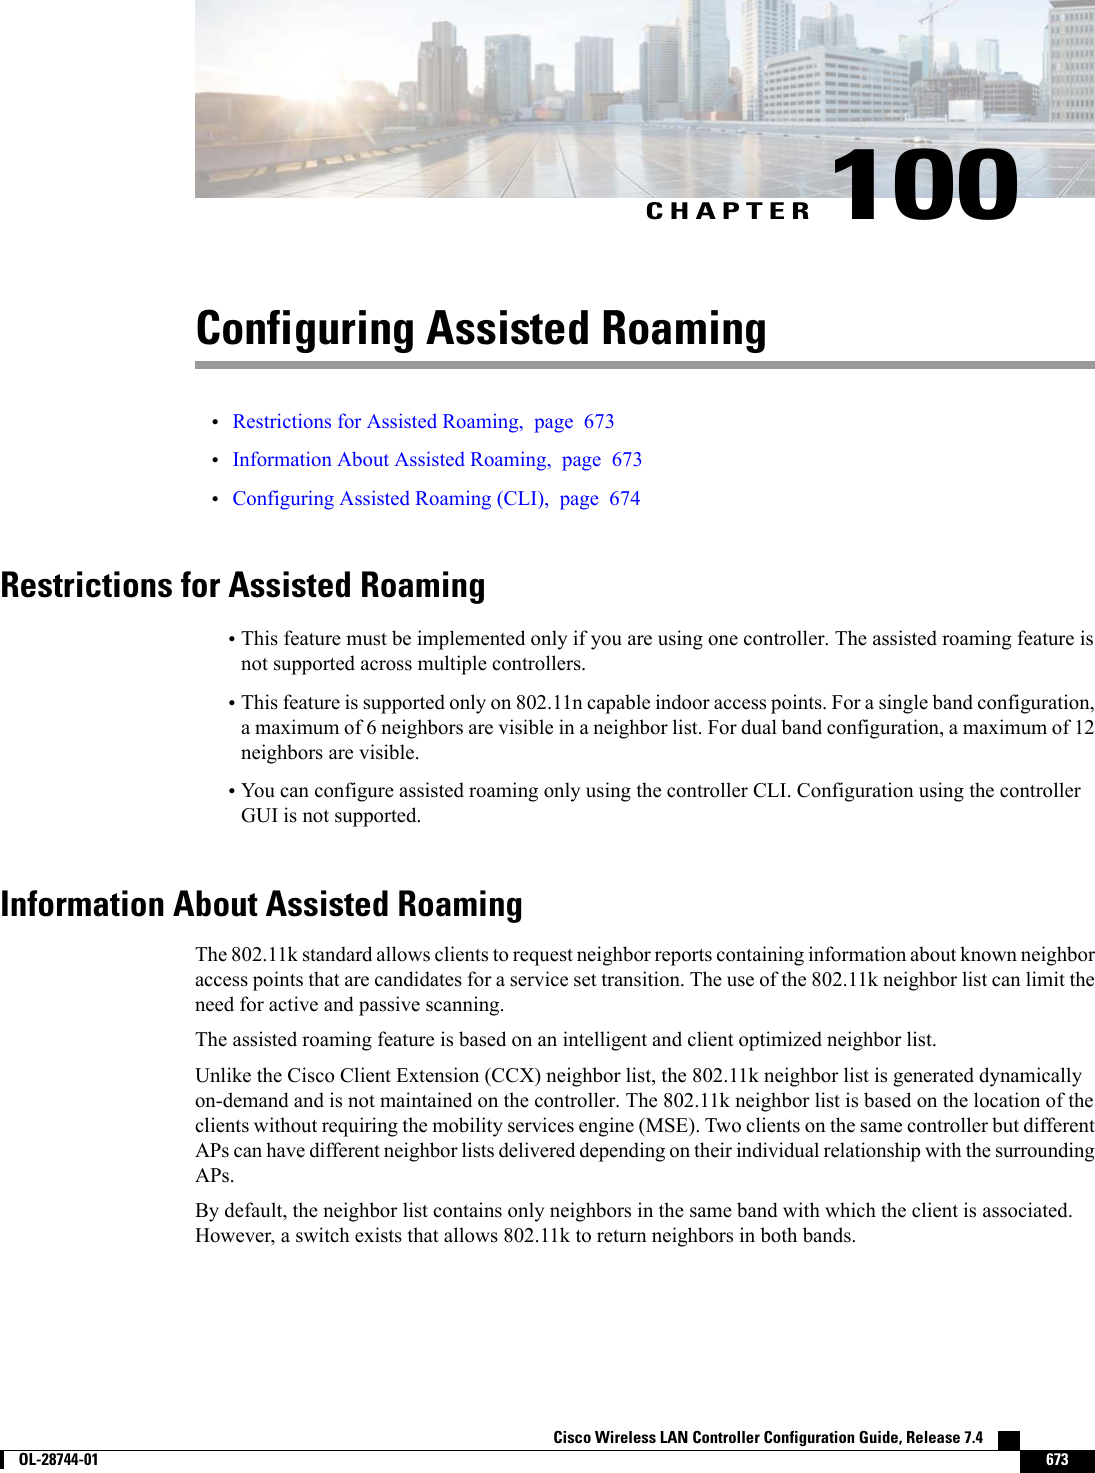 CHAPTER 100Configuring Assisted Roaming•Restrictions for Assisted Roaming, page 673•Information About Assisted Roaming, page 673•Configuring Assisted Roaming (CLI), page 674Restrictions for Assisted Roaming•This feature must be implemented only if you are using one controller. The assisted roaming feature isnot supported across multiple controllers.•This feature is supported only on 802.11n capable indoor access points. For a single band configuration,a maximum of 6 neighbors are visible in a neighbor list. For dual band configuration, a maximum of 12neighbors are visible.•You can configure assisted roaming only using the controller CLI. Configuration using the controllerGUI is not supported.Information About Assisted RoamingThe 802.11k standard allows clients to request neighbor reports containing information about known neighboraccess points that are candidates for a service set transition. The use of the 802.11k neighbor list can limit theneed for active and passive scanning.The assisted roaming feature is based on an intelligent and client optimized neighbor list.Unlike the Cisco Client Extension (CCX) neighbor list, the 802.11k neighbor list is generated dynamicallyon-demand and is not maintained on the controller. The 802.11k neighbor list is based on the location of theclients without requiring the mobility services engine (MSE). Two clients on the same controller but differentAPs can have different neighbor lists delivered depending on their individual relationship with the surroundingAPs.By default, the neighbor list contains only neighbors in the same band with which the client is associated.However, a switch exists that allows 802.11k to return neighbors in both bands.Cisco Wireless LAN Controller Configuration Guide, Release 7.4        OL-28744-01 673